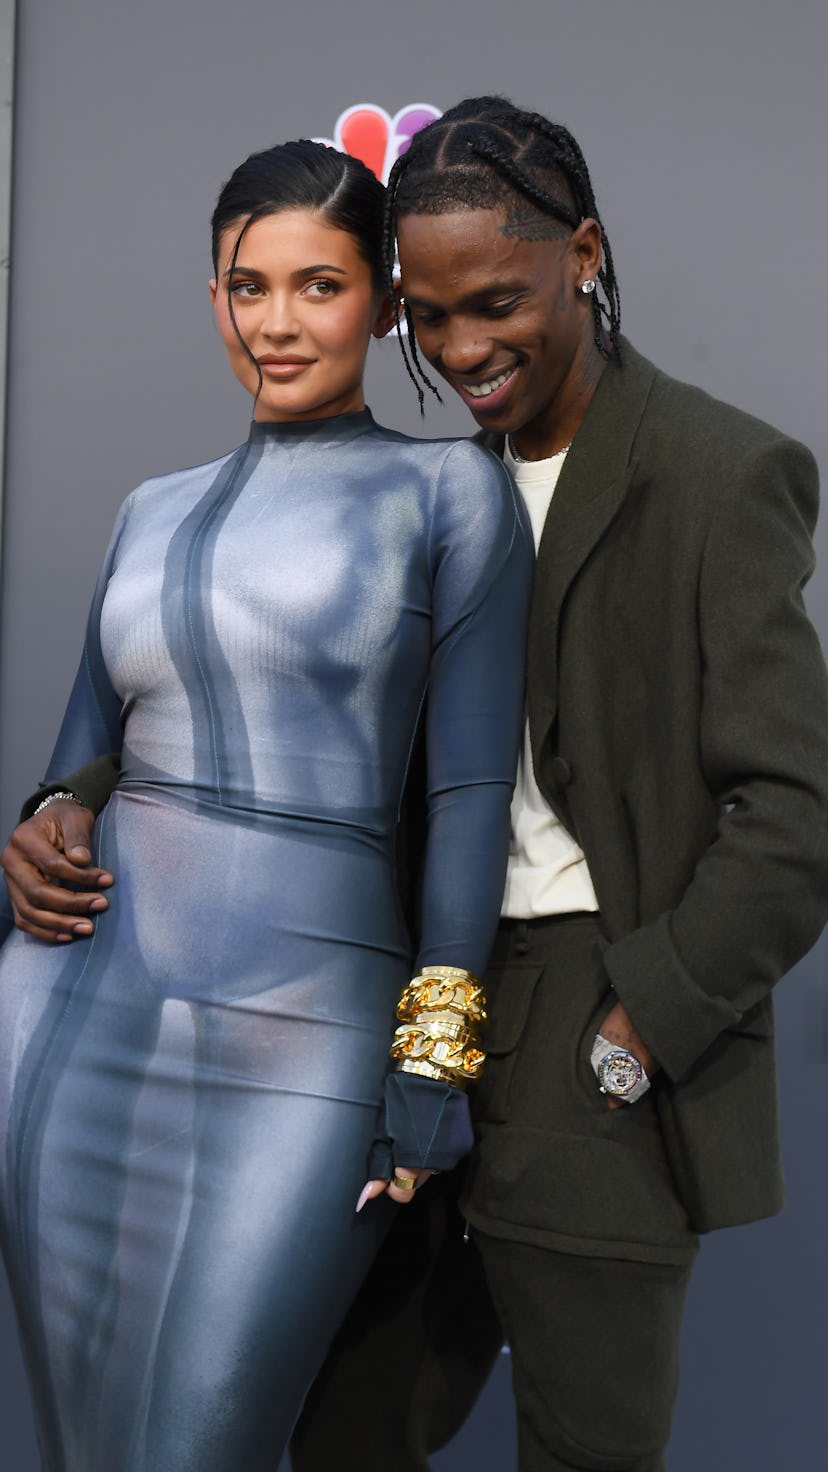 Kylie Jenner and Travis Scott at the 2022 Billboard Music Awards